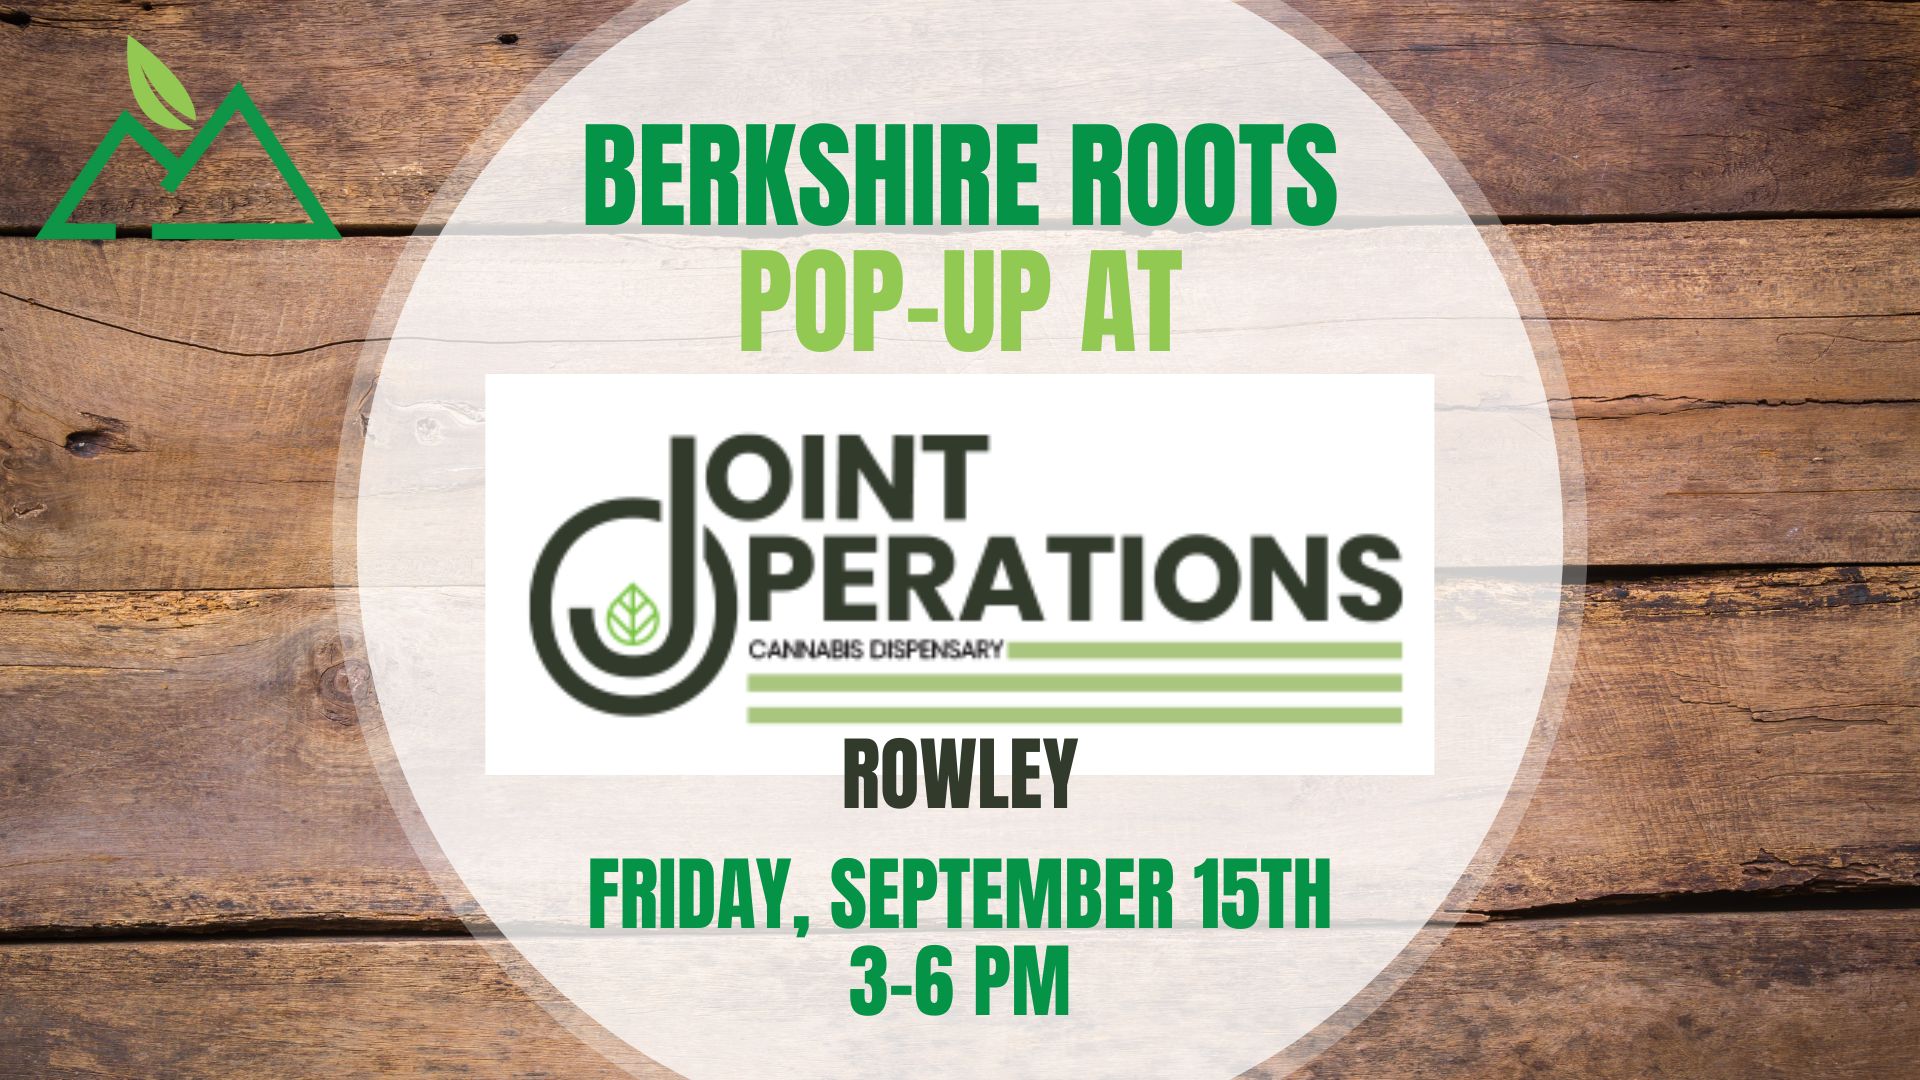 Berkshire Roots Pop Up at Joint Operations in Rowley